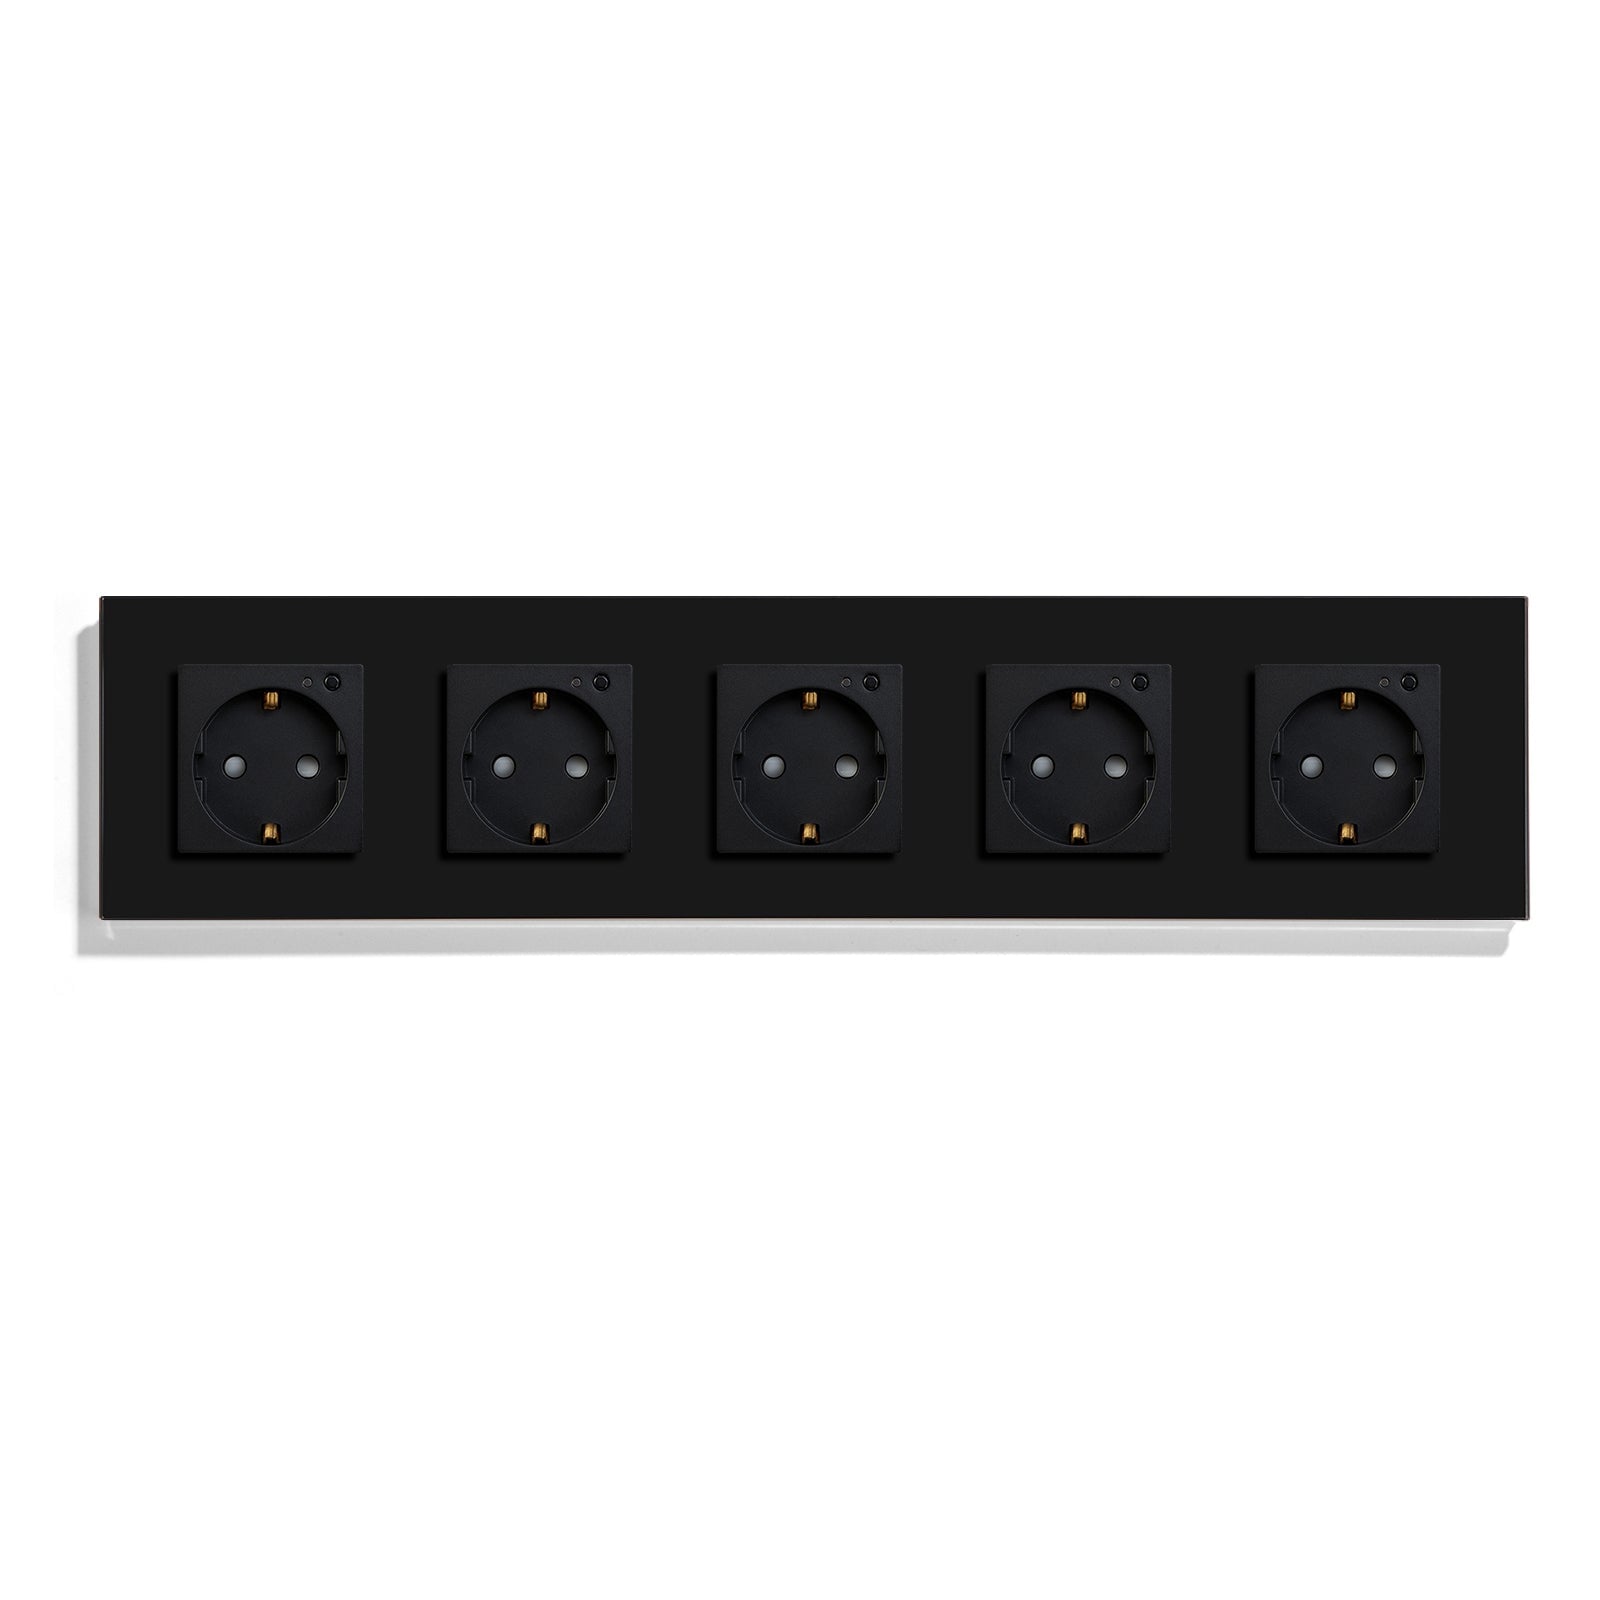 BSEED Wifi EU Wall Sockets Single Power Outlets Kids Protection Wall Plates & Covers Bseedswitch black Quintuple 